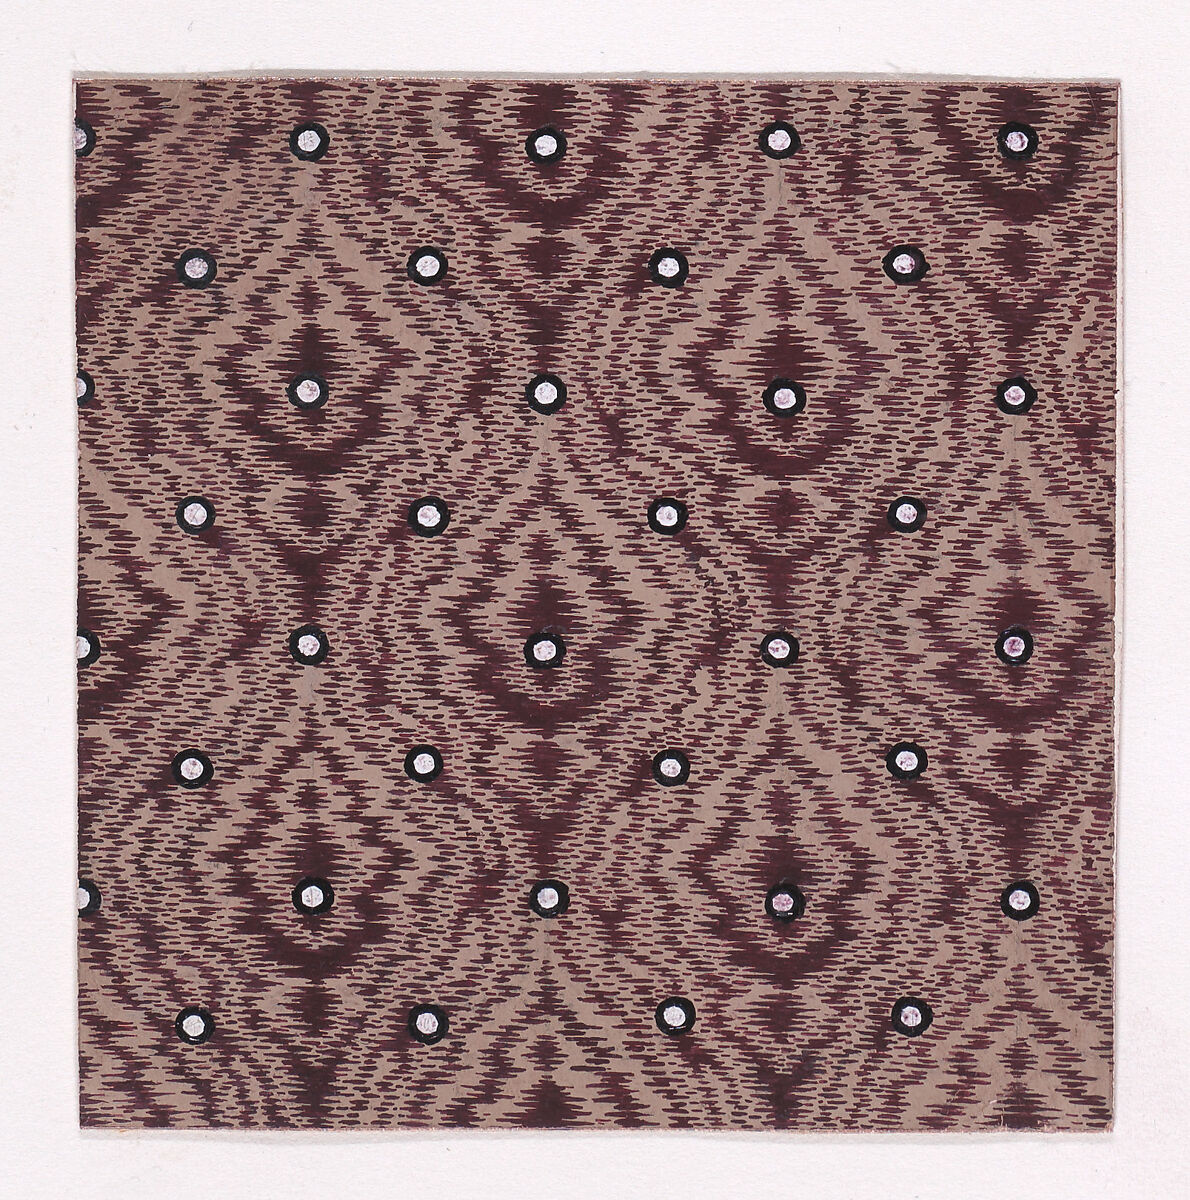 Textile Design of Alternating Rows of Pearls over an Abstract Background Simulating Tie-Dye, Anonymous, Alsatian, 19th century, Gouache 